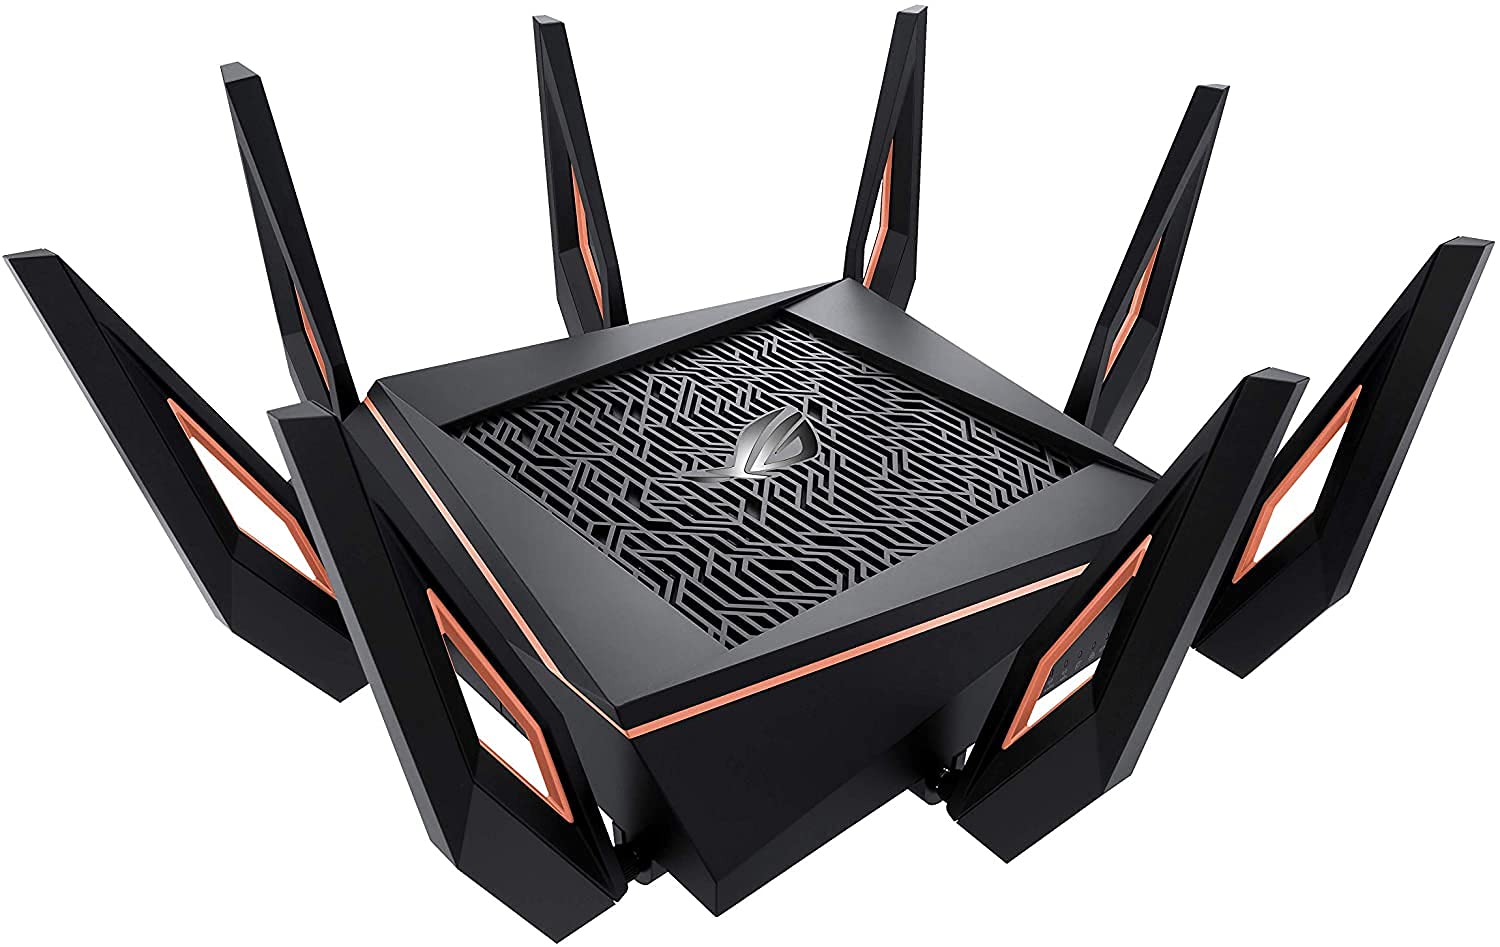 ASUS Gaming Router GT-AX11000 ROG Rapture $156.78 - Amazon Warehouse